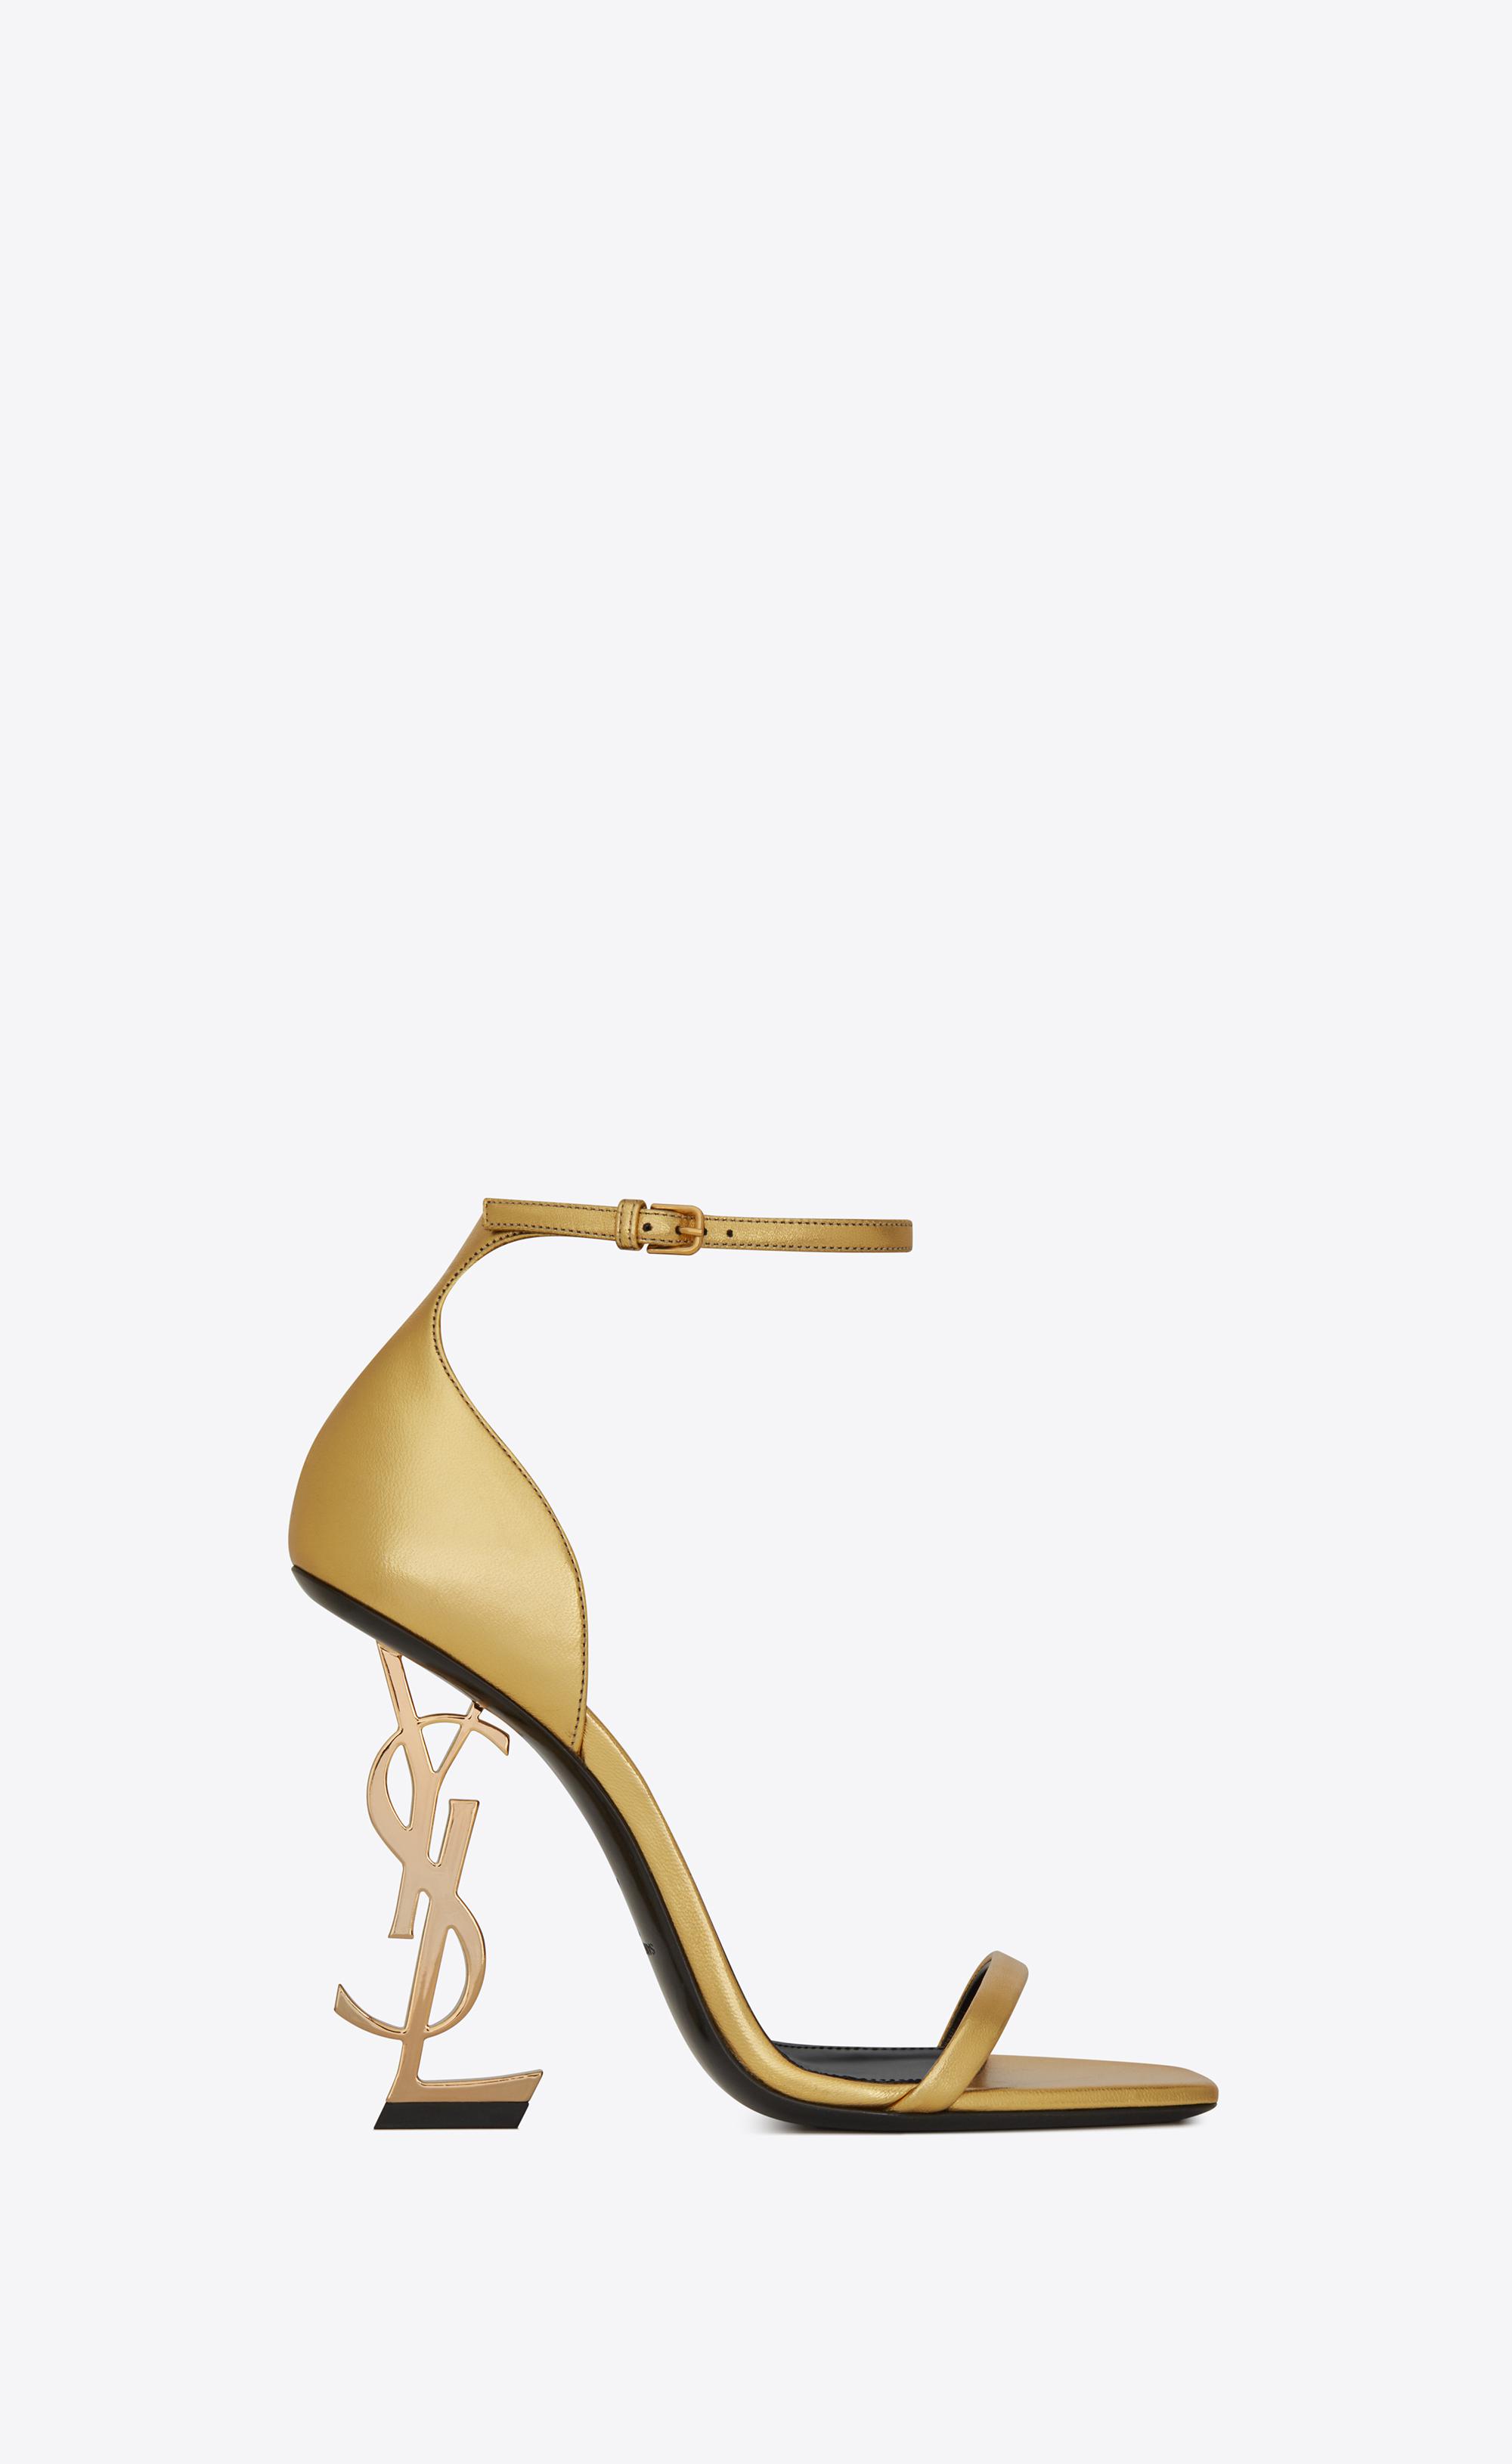 Saint Laurent Opyum Sandals With Gold-toned Heel In Smooth Leather in  Metallic | Lyst